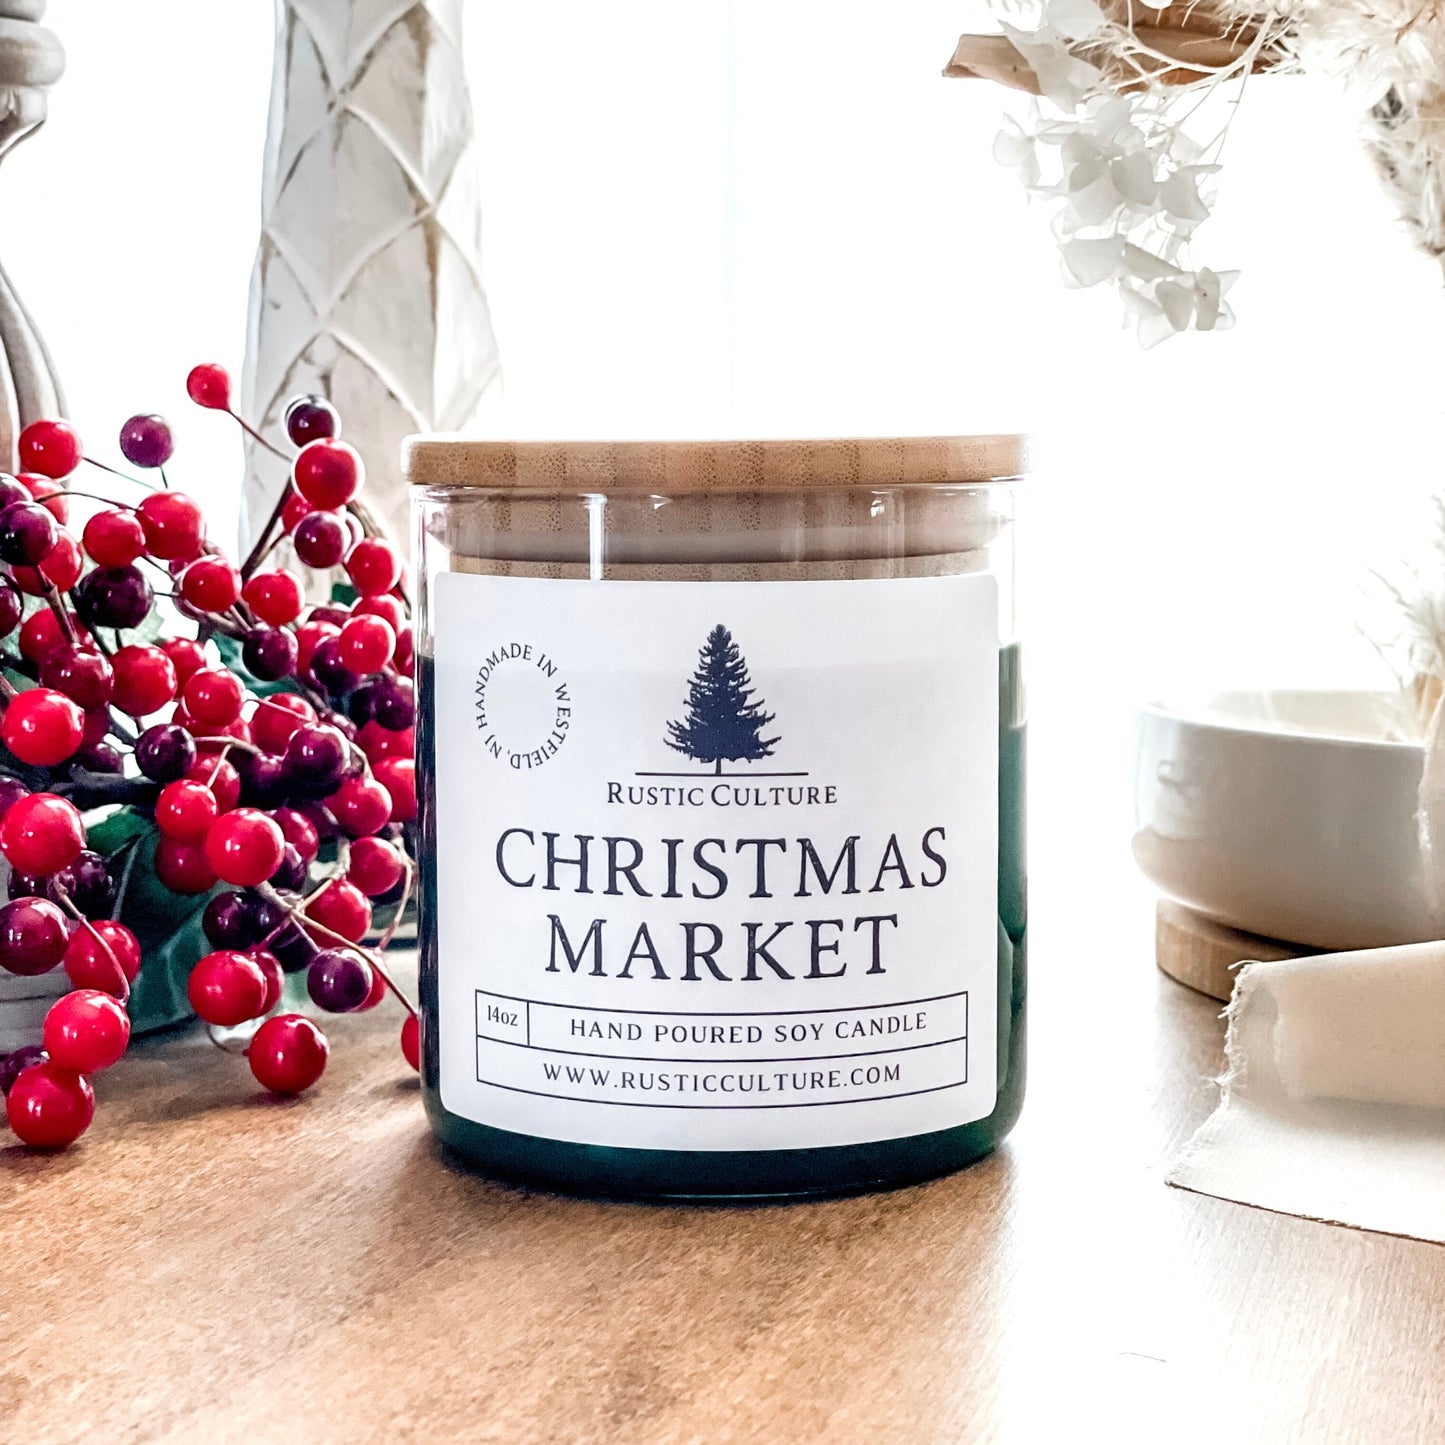 Christmas Market candle. All the Christmas scents in one candle!